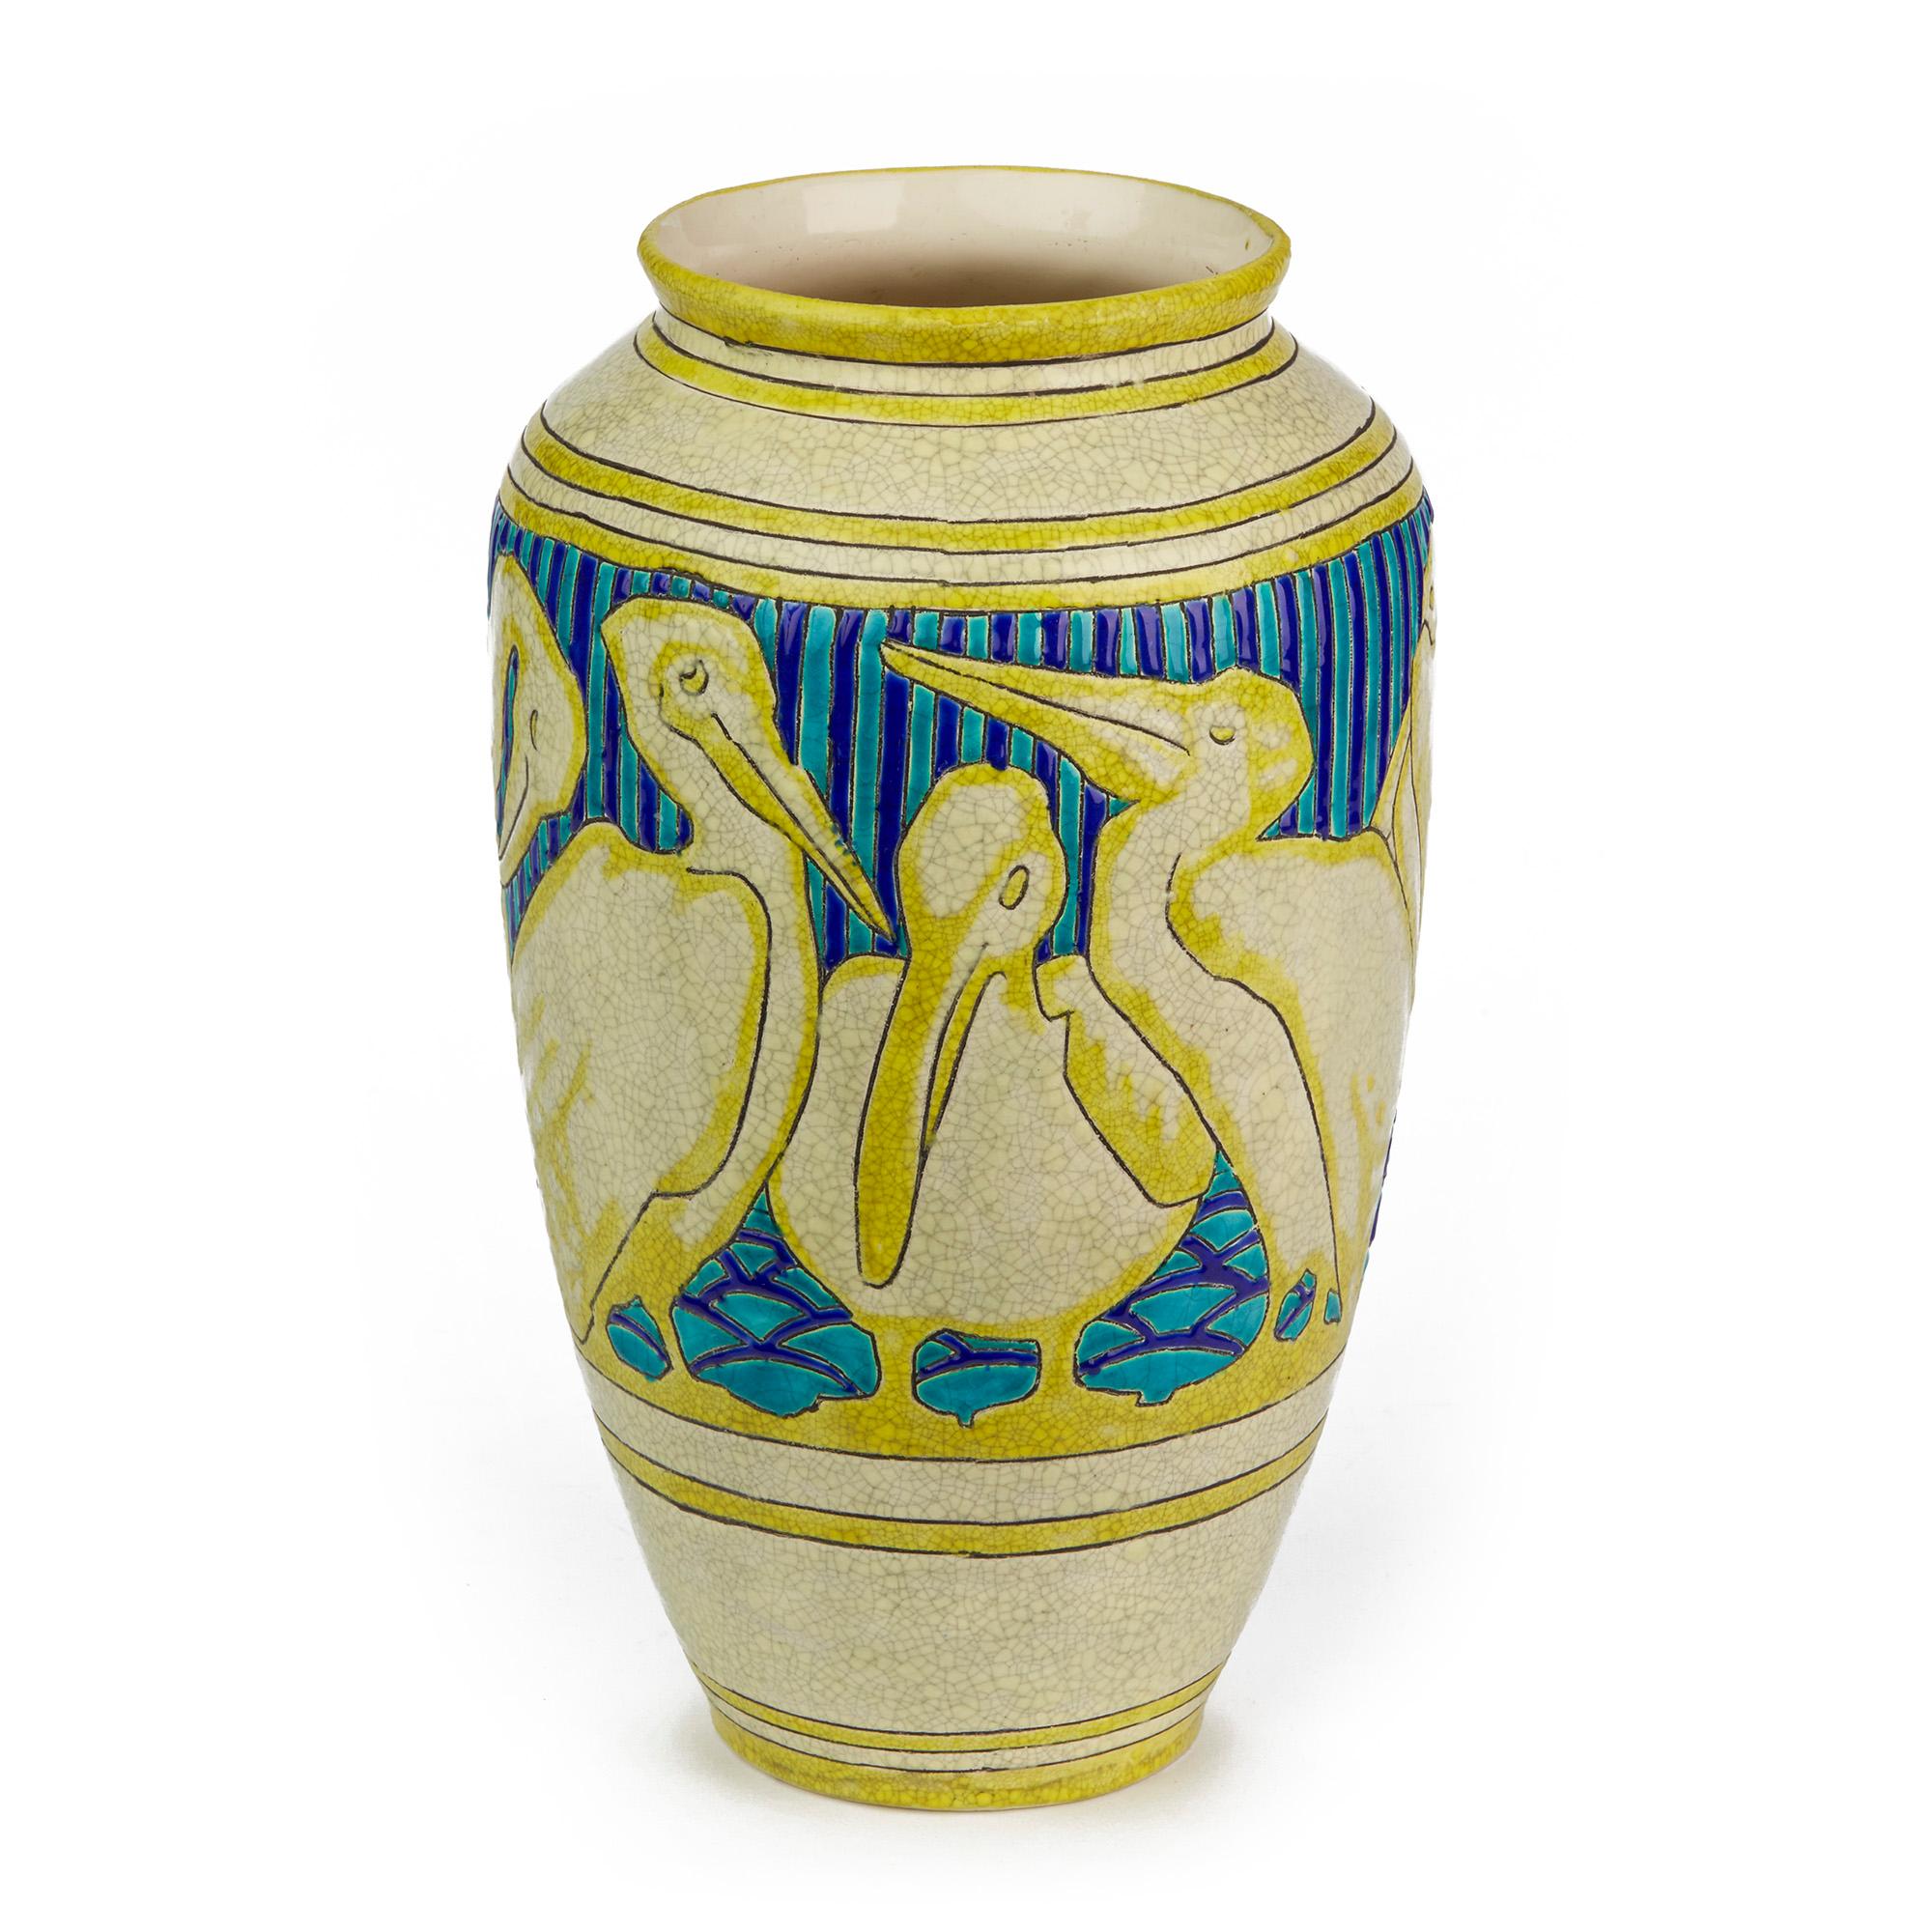 Extremely rare and impressive Belgian Art Deco earthenware vase decorated with Pelicans designed by Charles Catteau for Boch Frères Keramis and created in 1925. This large bulbous vase is decorated with stylized Pelicans in various attitudes around